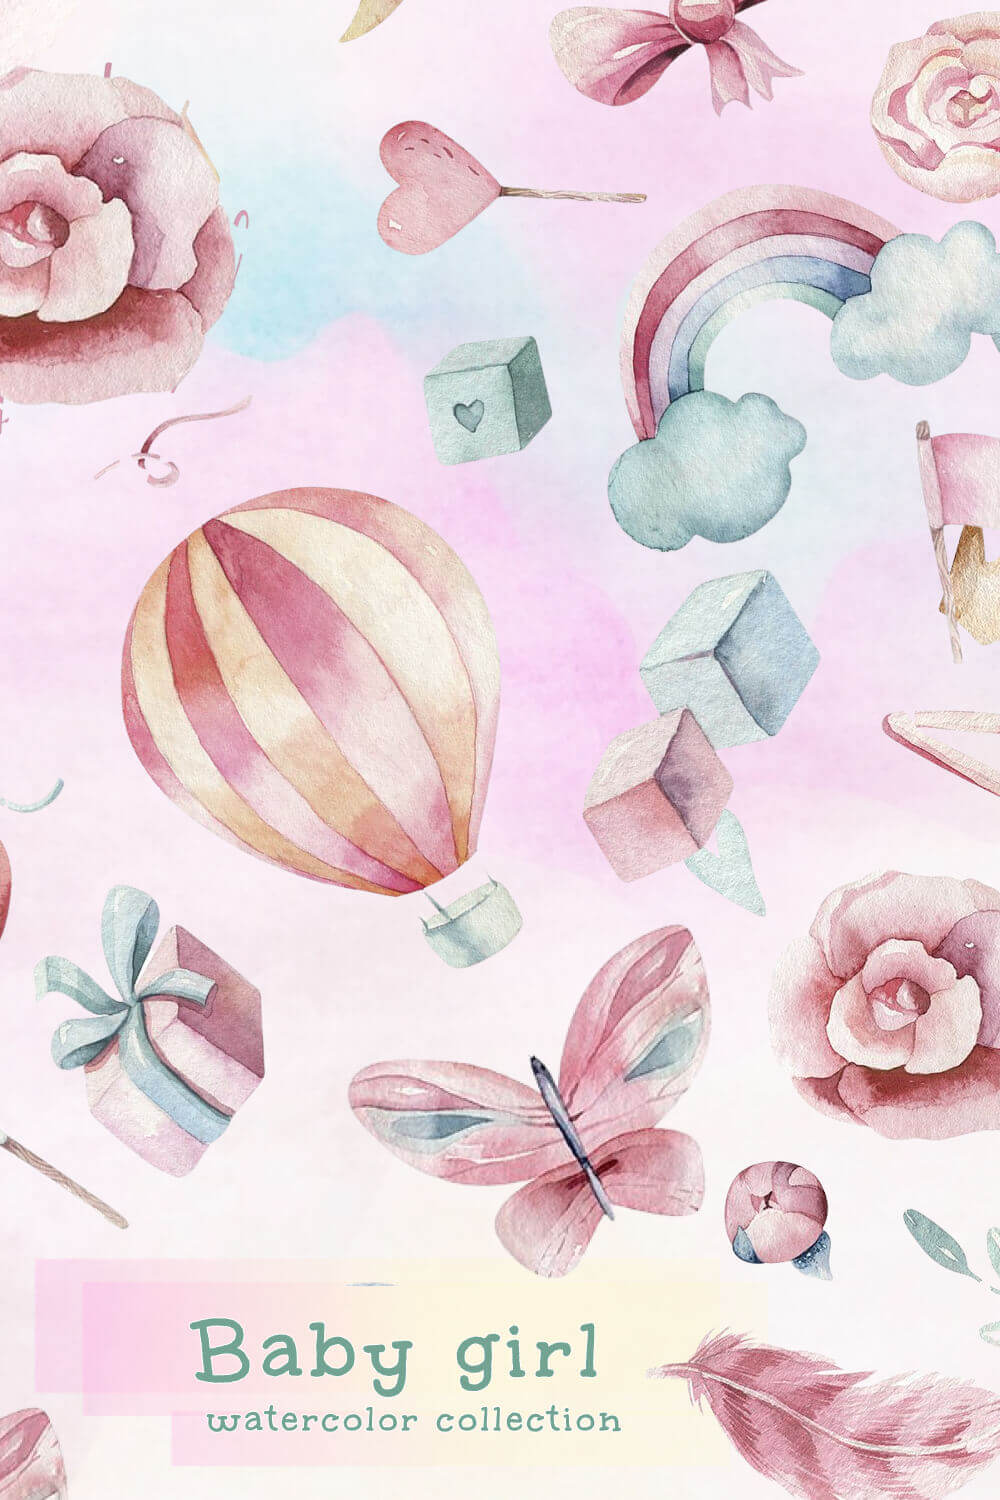 Large balloon, feathers, butterflies are made in watercolor.